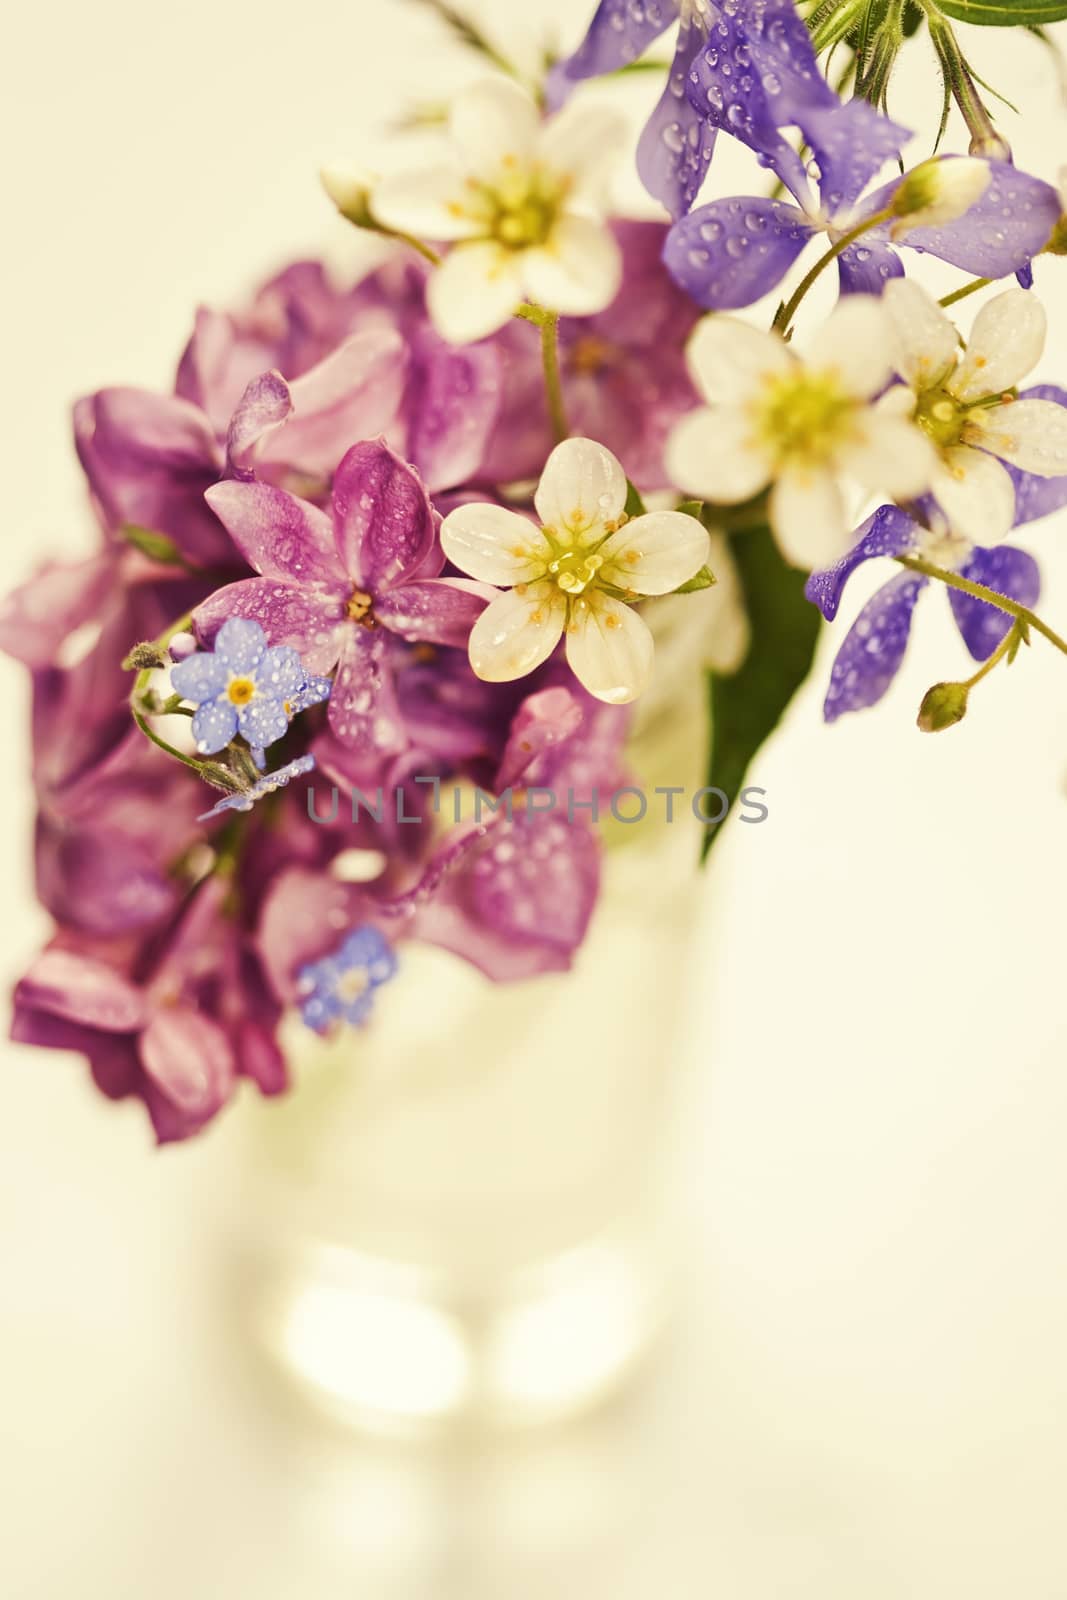 Beautiful spring flowers in a vase on white background